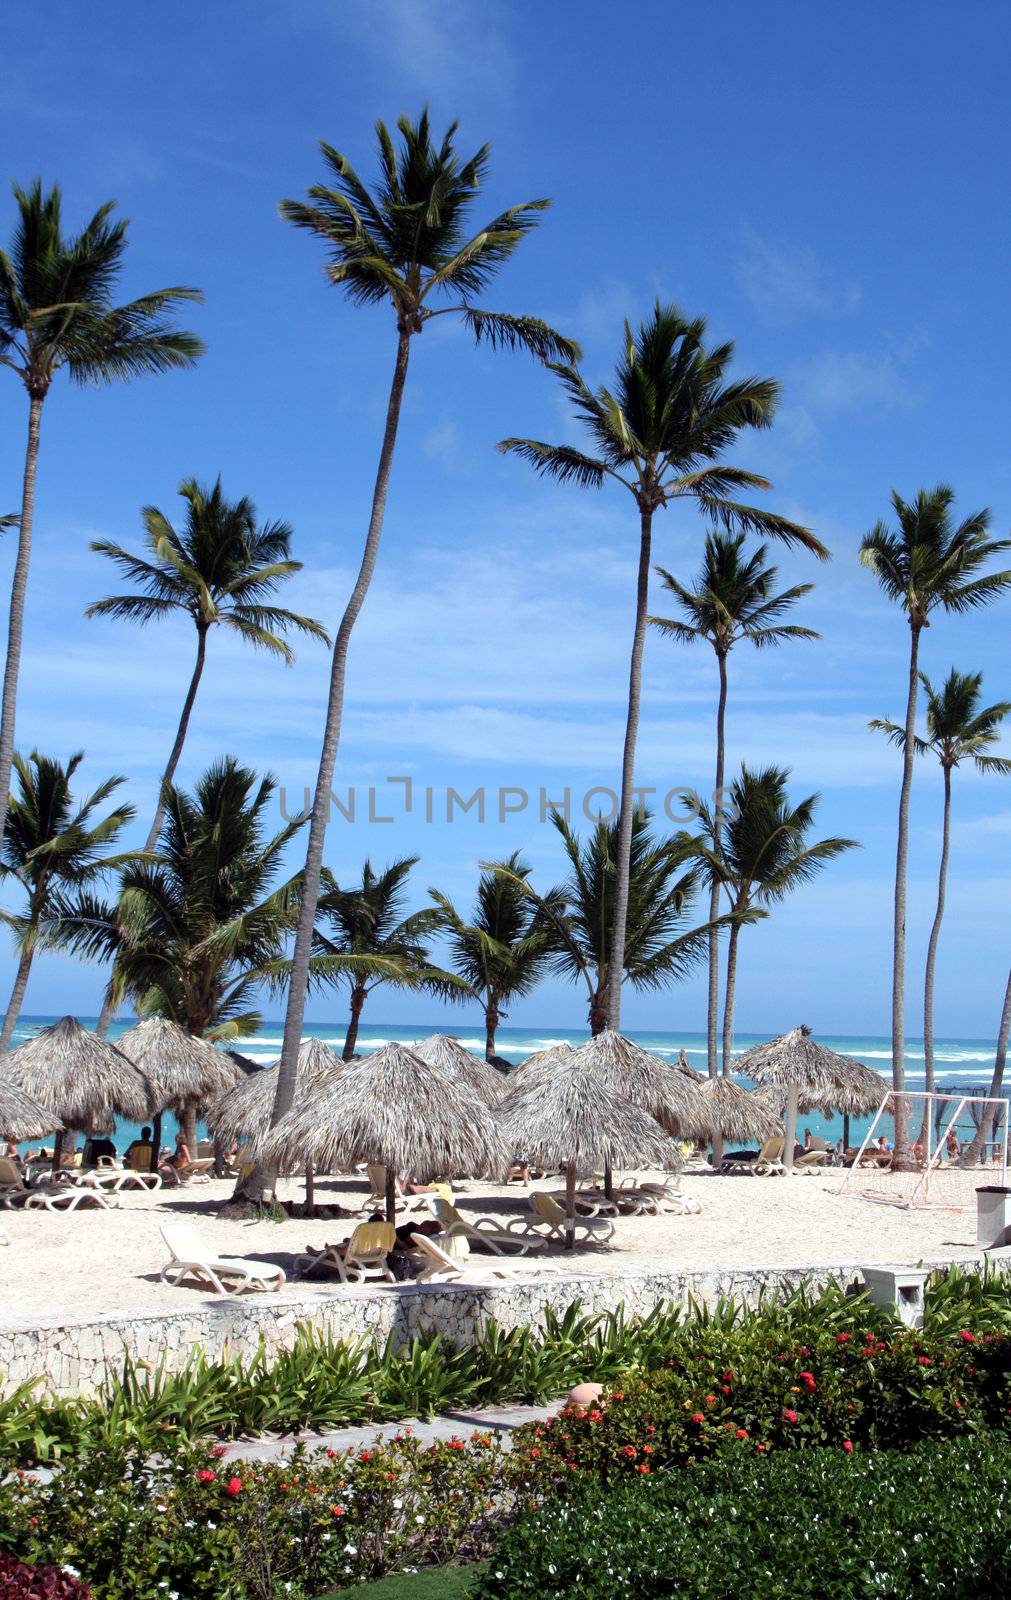 The stunning beach front of a resort on the beach at Punta Cana, Dominican Republic.